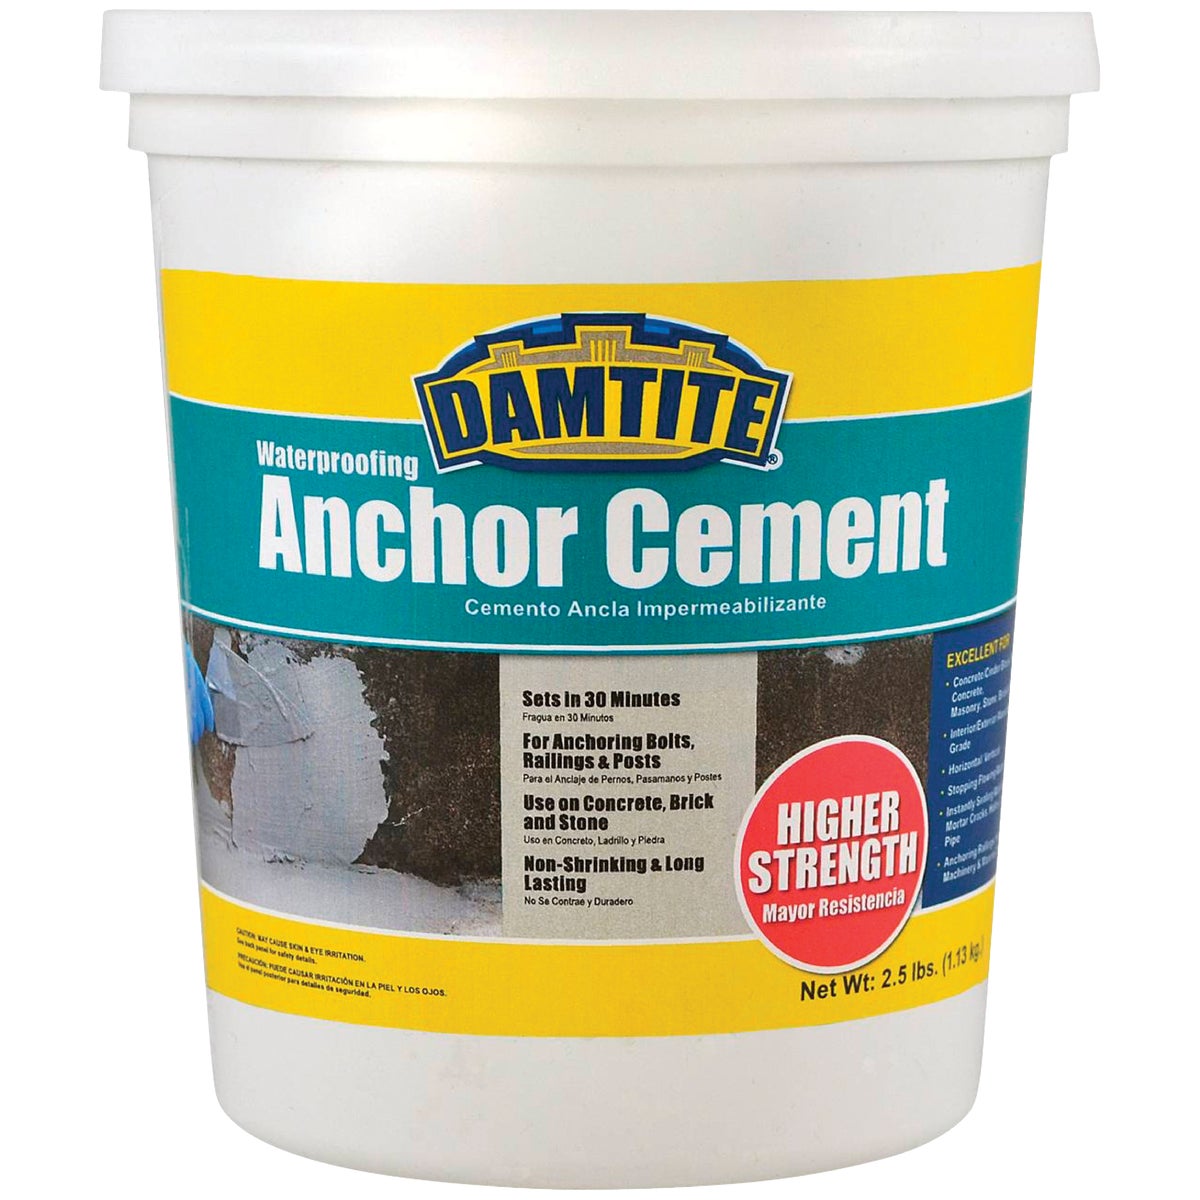 Item 261483, Cement-based, quick-set, waterproof cement for setting bolts, hooks, fence 